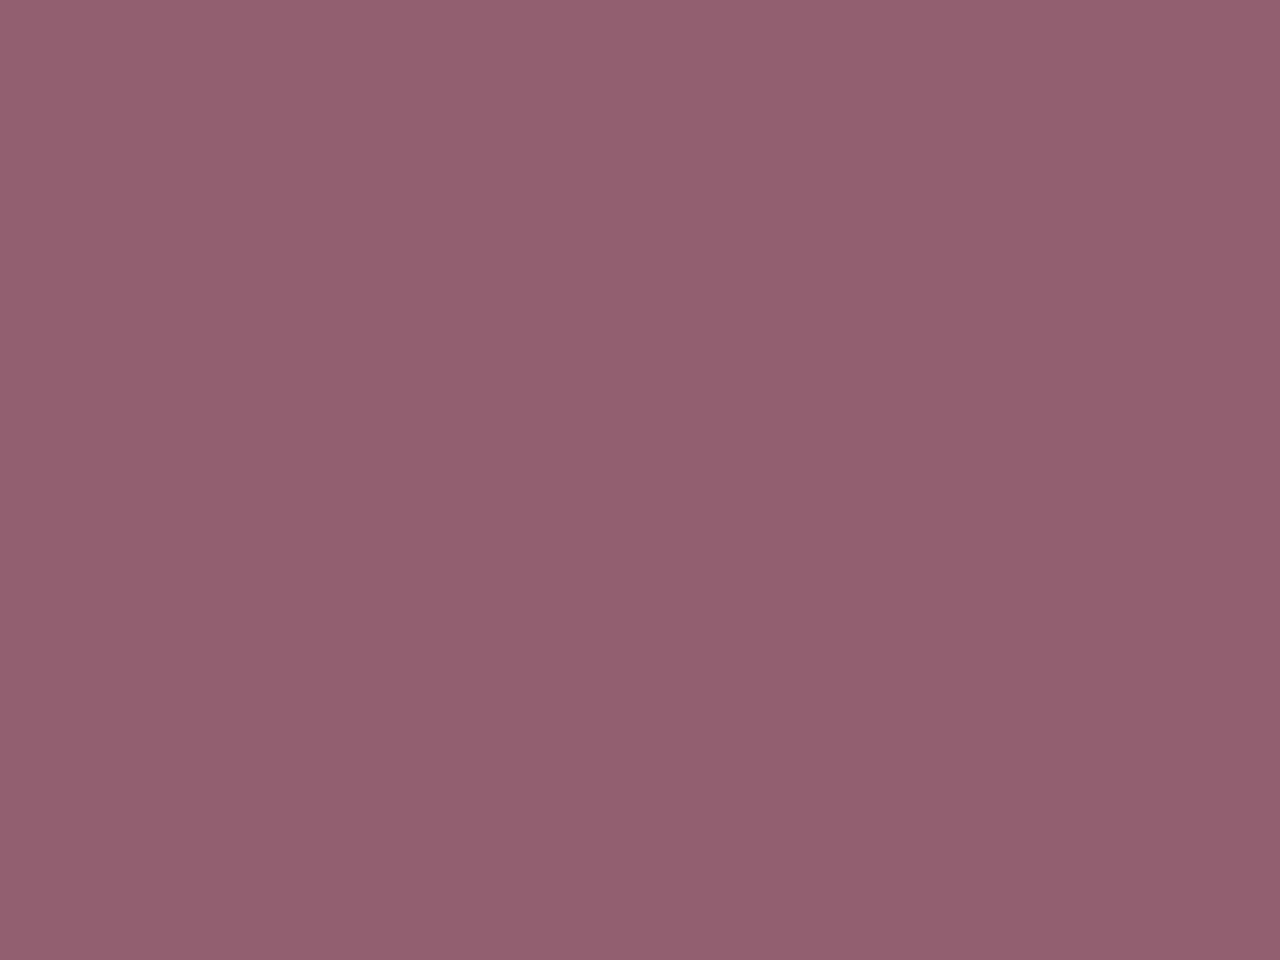 1280x960 Raspberry Glace Solid Color Background